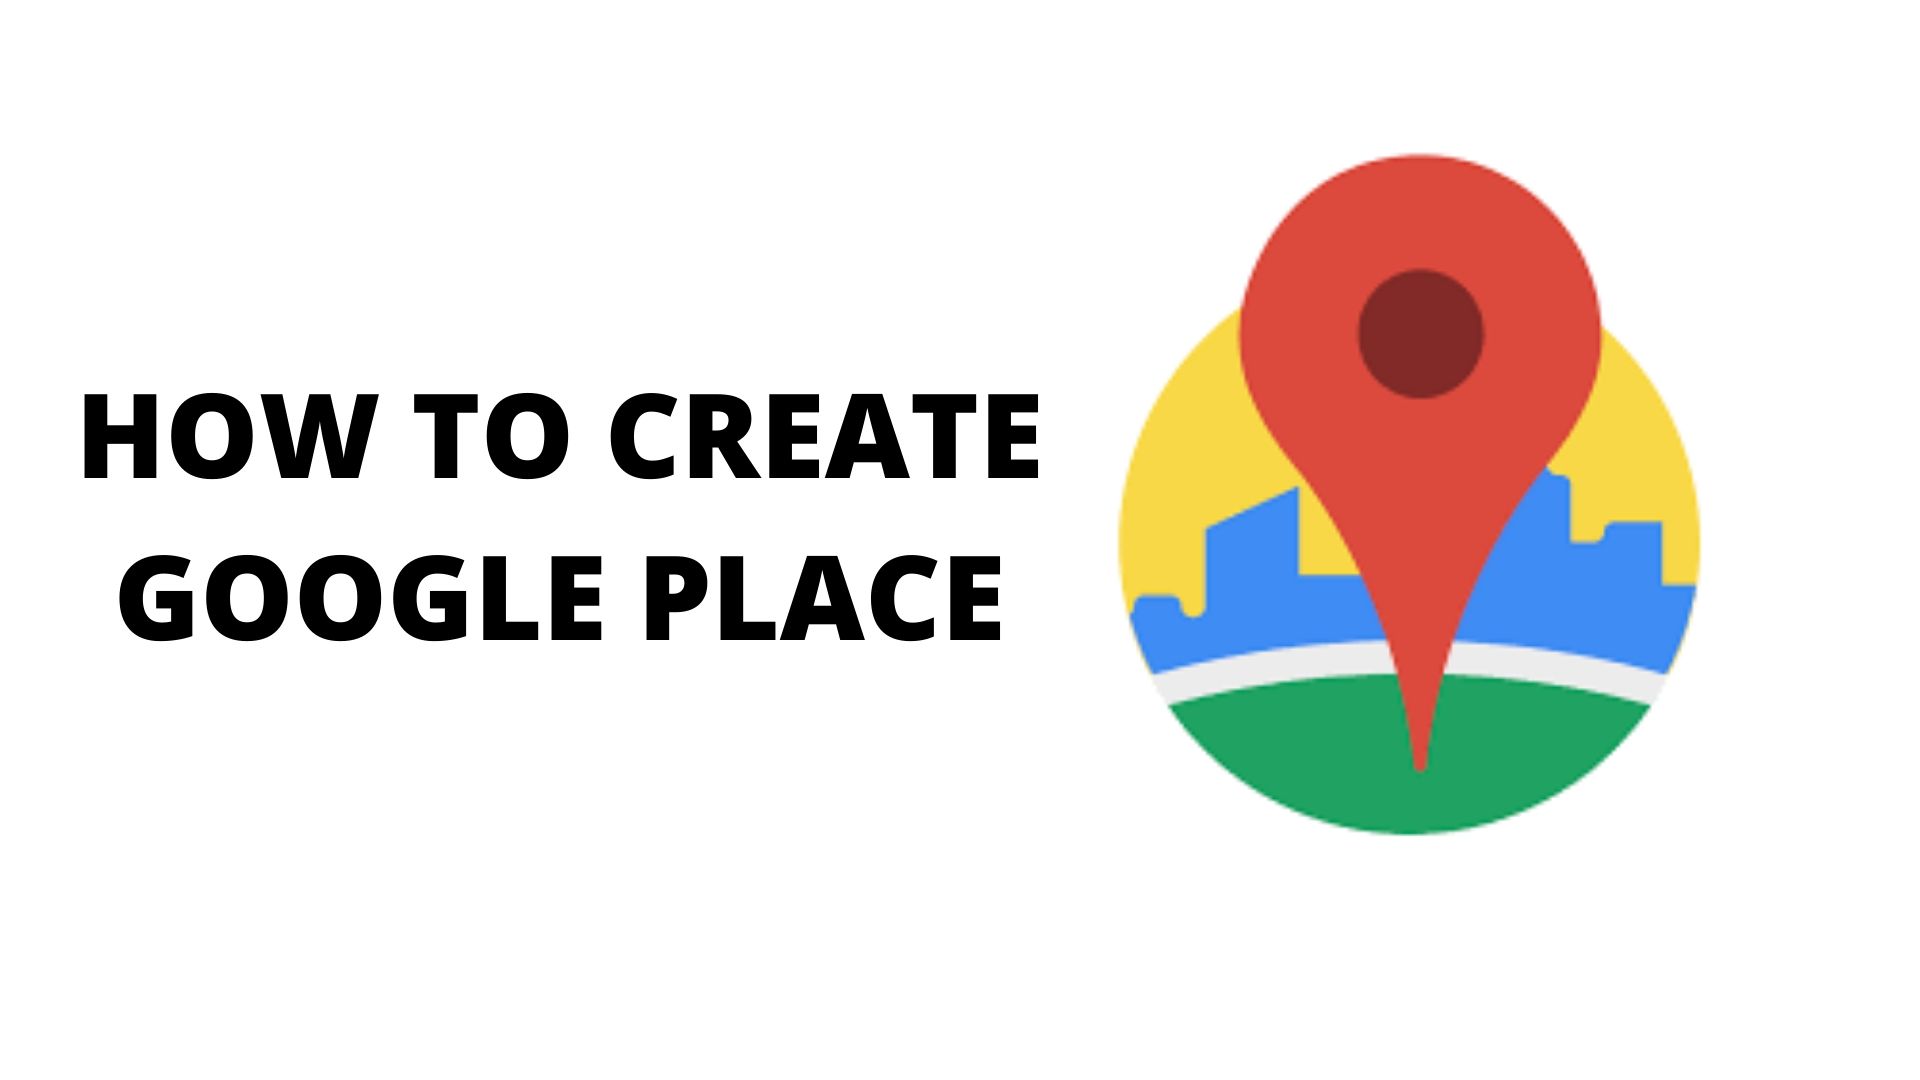 HOW TO CREATE GOOGLE PLACE